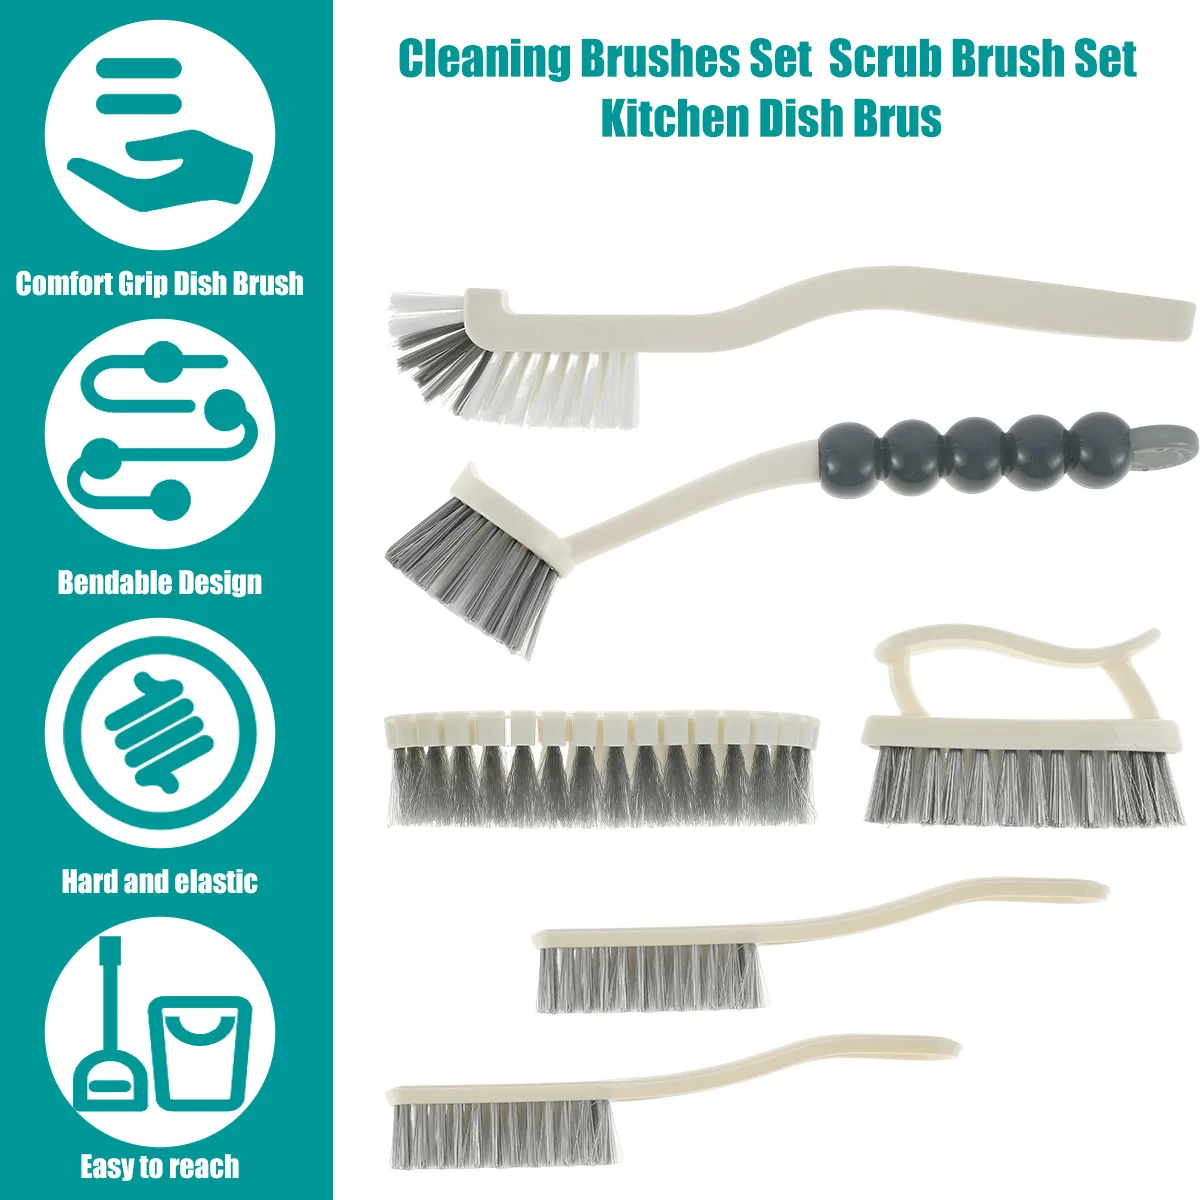 https://ae01.alicdn.com/kf/S52686dfd03b5449b8ce02232c0205f237/6Pcs-Home-Cleaning-Brushes-Set-Multifunction-Long-Handle-Brush-Kitchen-Dish-Brush-with-Comfortable-Grip-Bendable.jpg